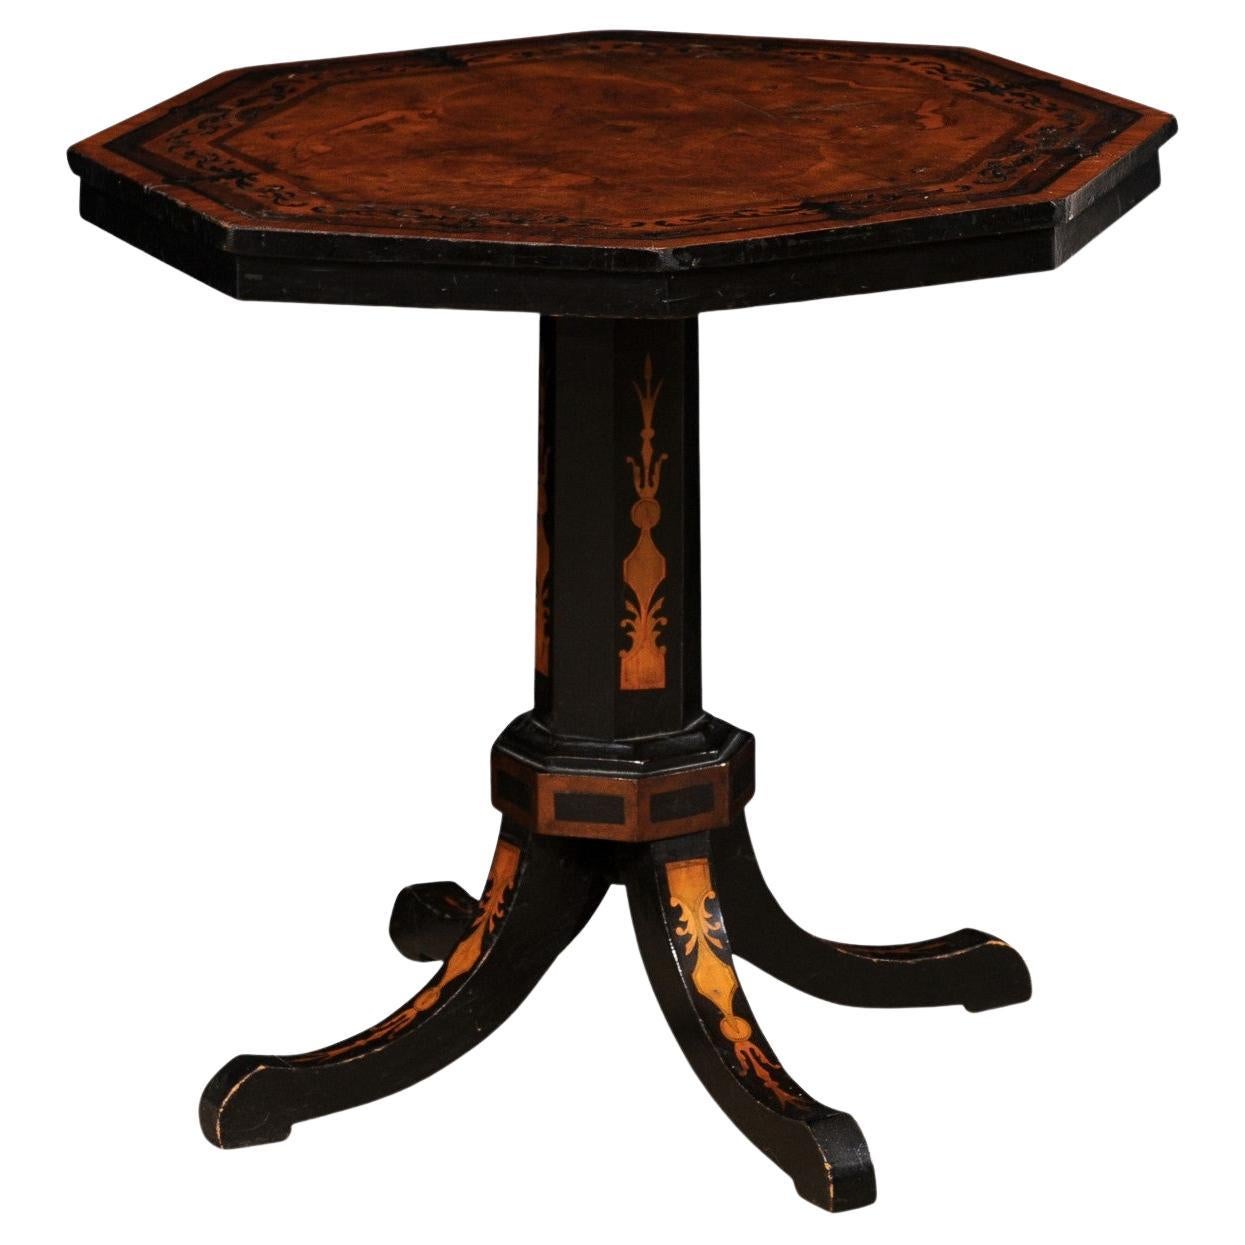 19th Century Octagonal Pedestal Table with Wonderful Inlay Embellishments